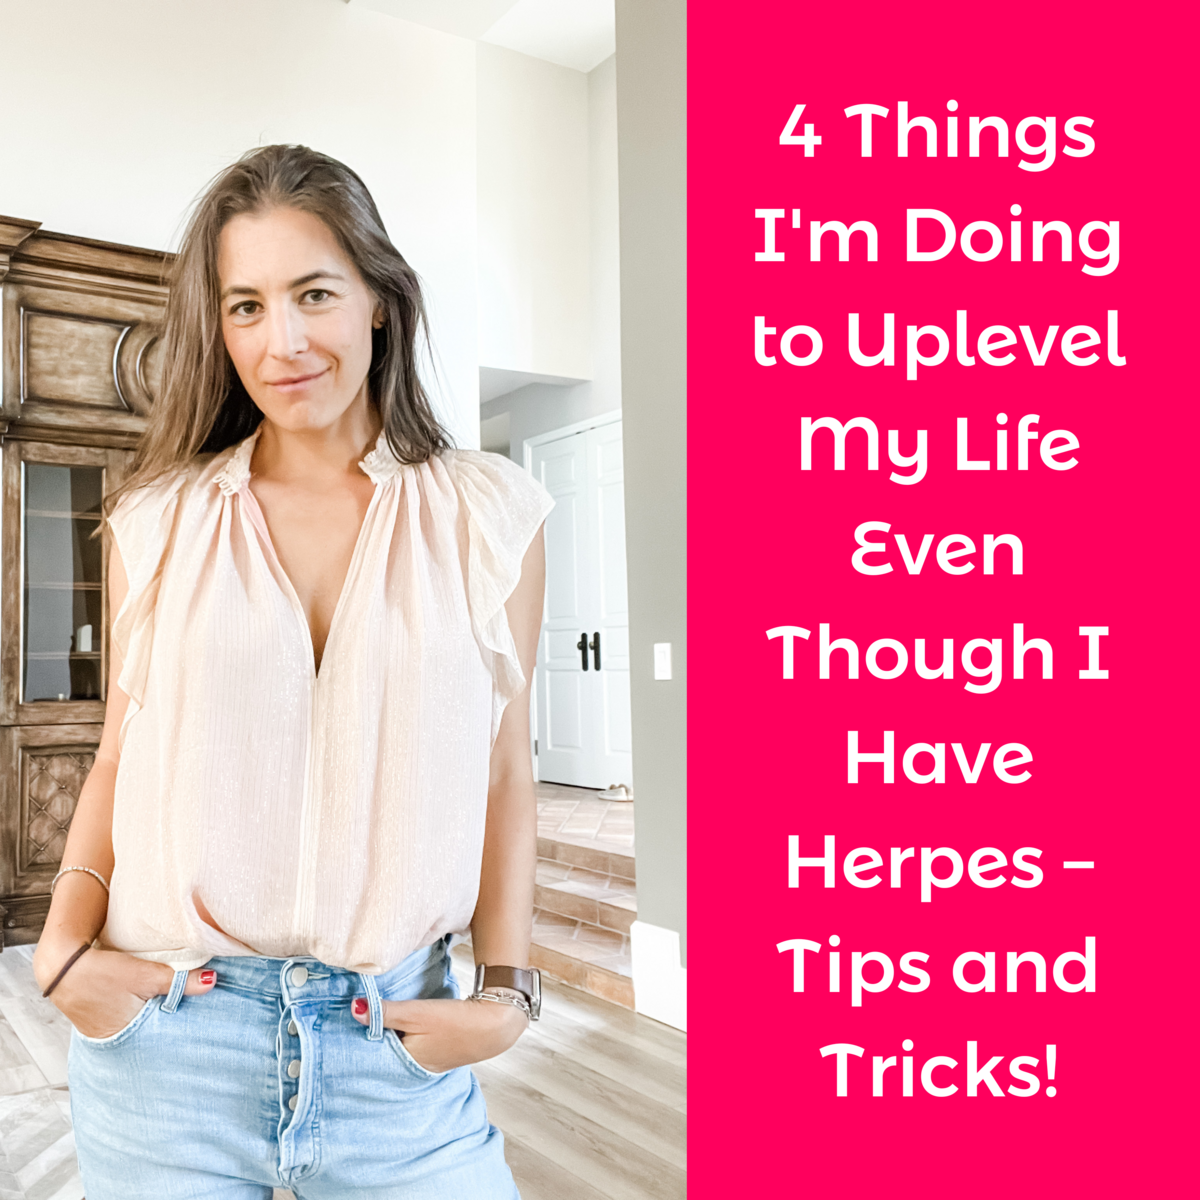 4 things i'm doing to uplevel my life Podcast cover Libsyn (Podcast Cover)